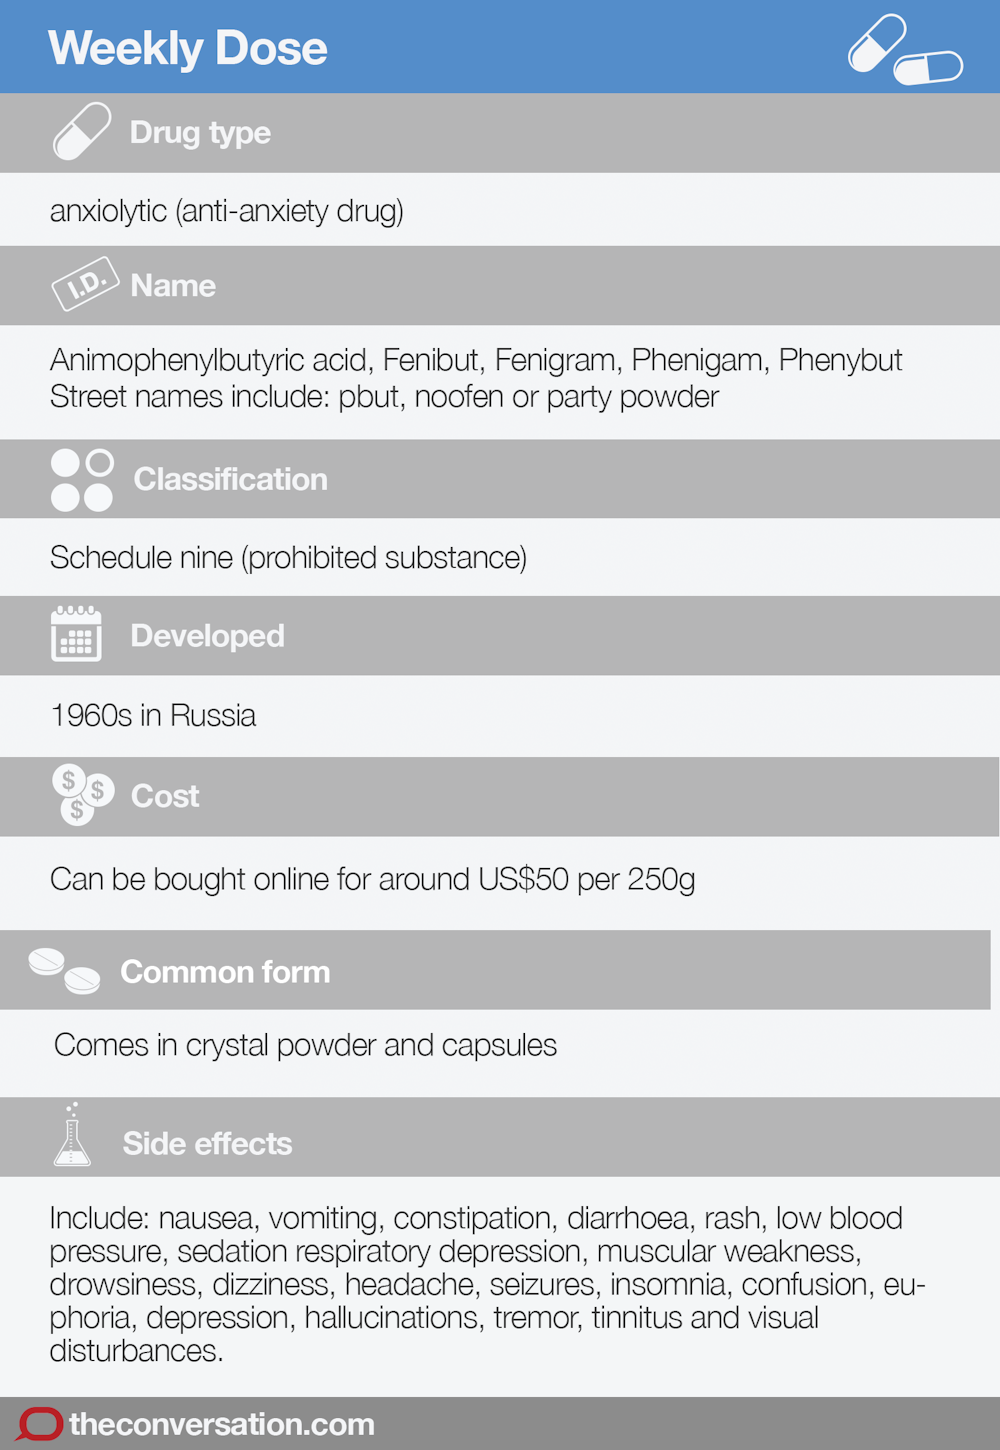 weekly dose: phenibut – the russian anti-anxiety drug linked to gold